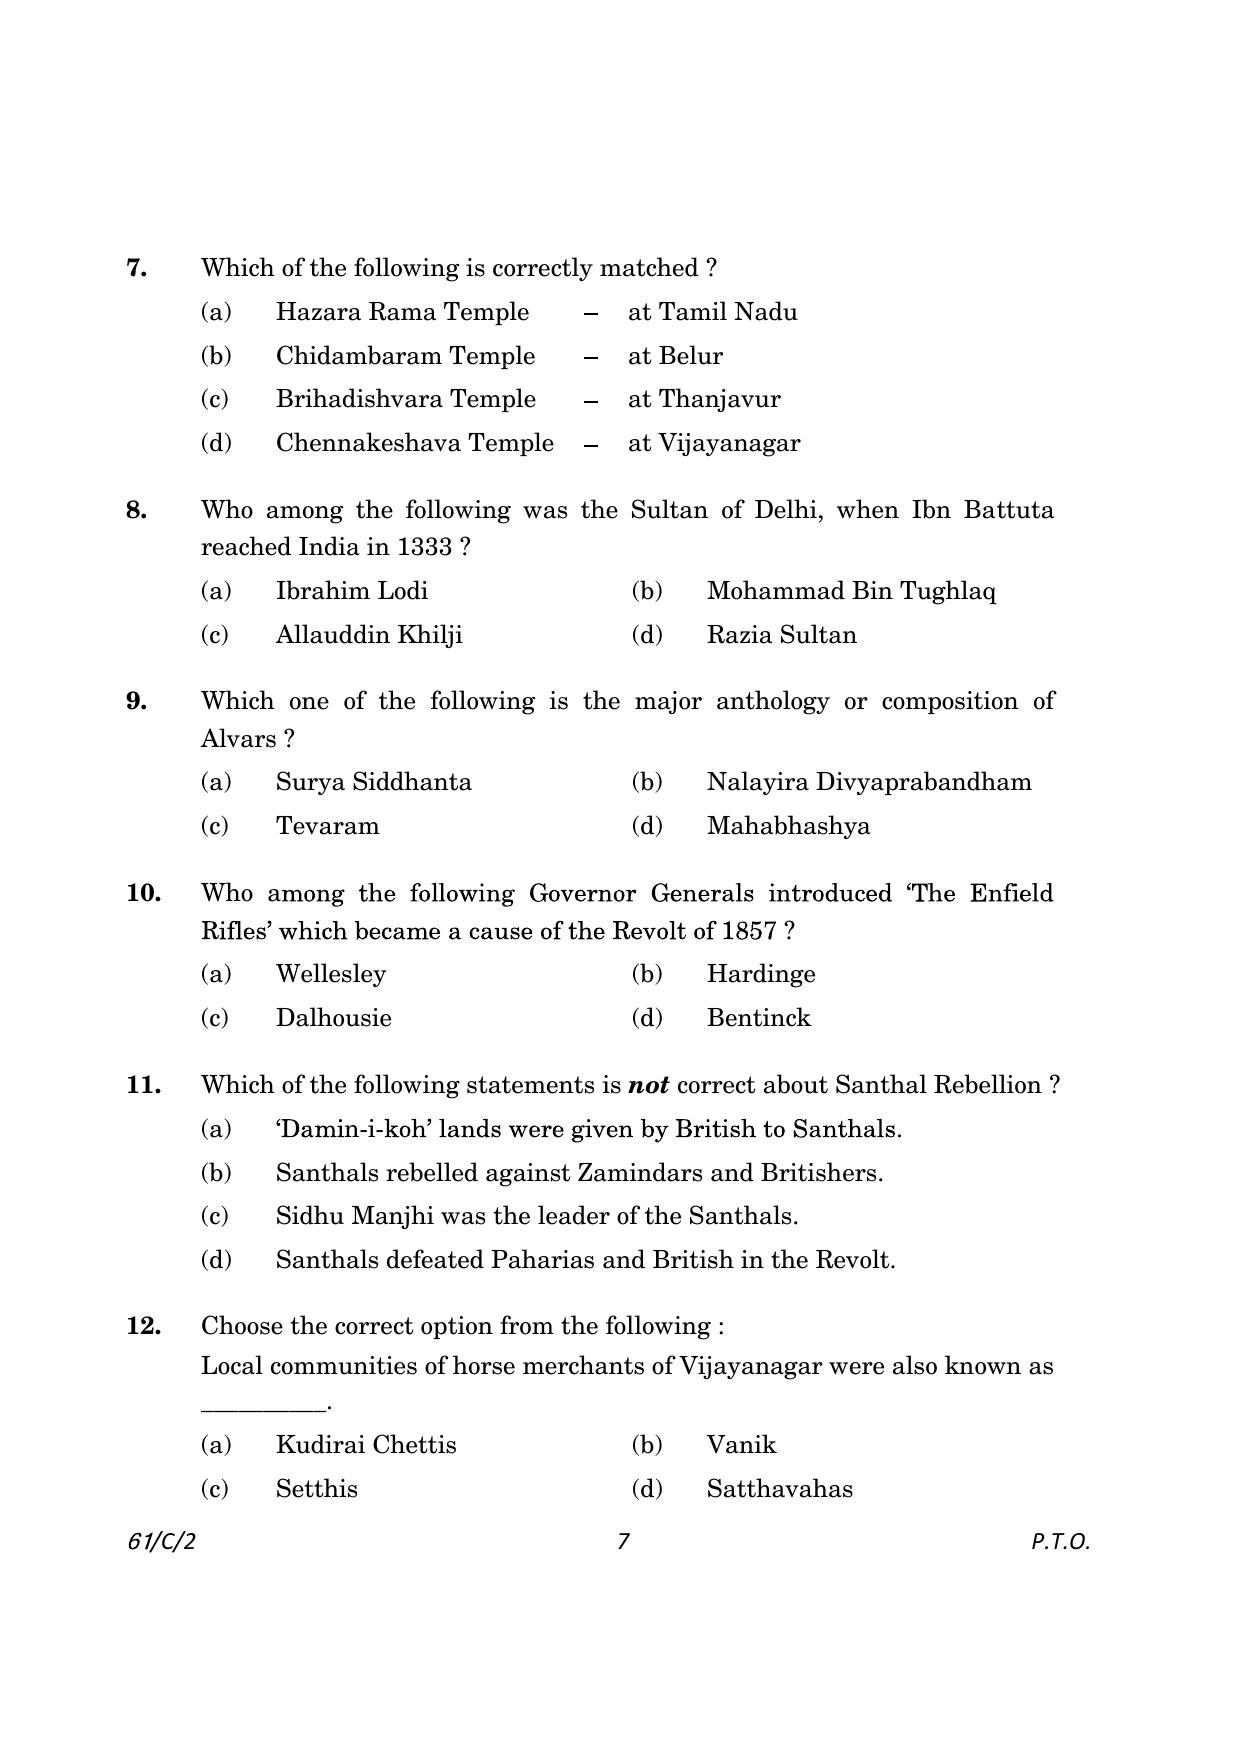 CBSE Class 12 61-2 History 2023 (Compartment) Question Paper - Page 7